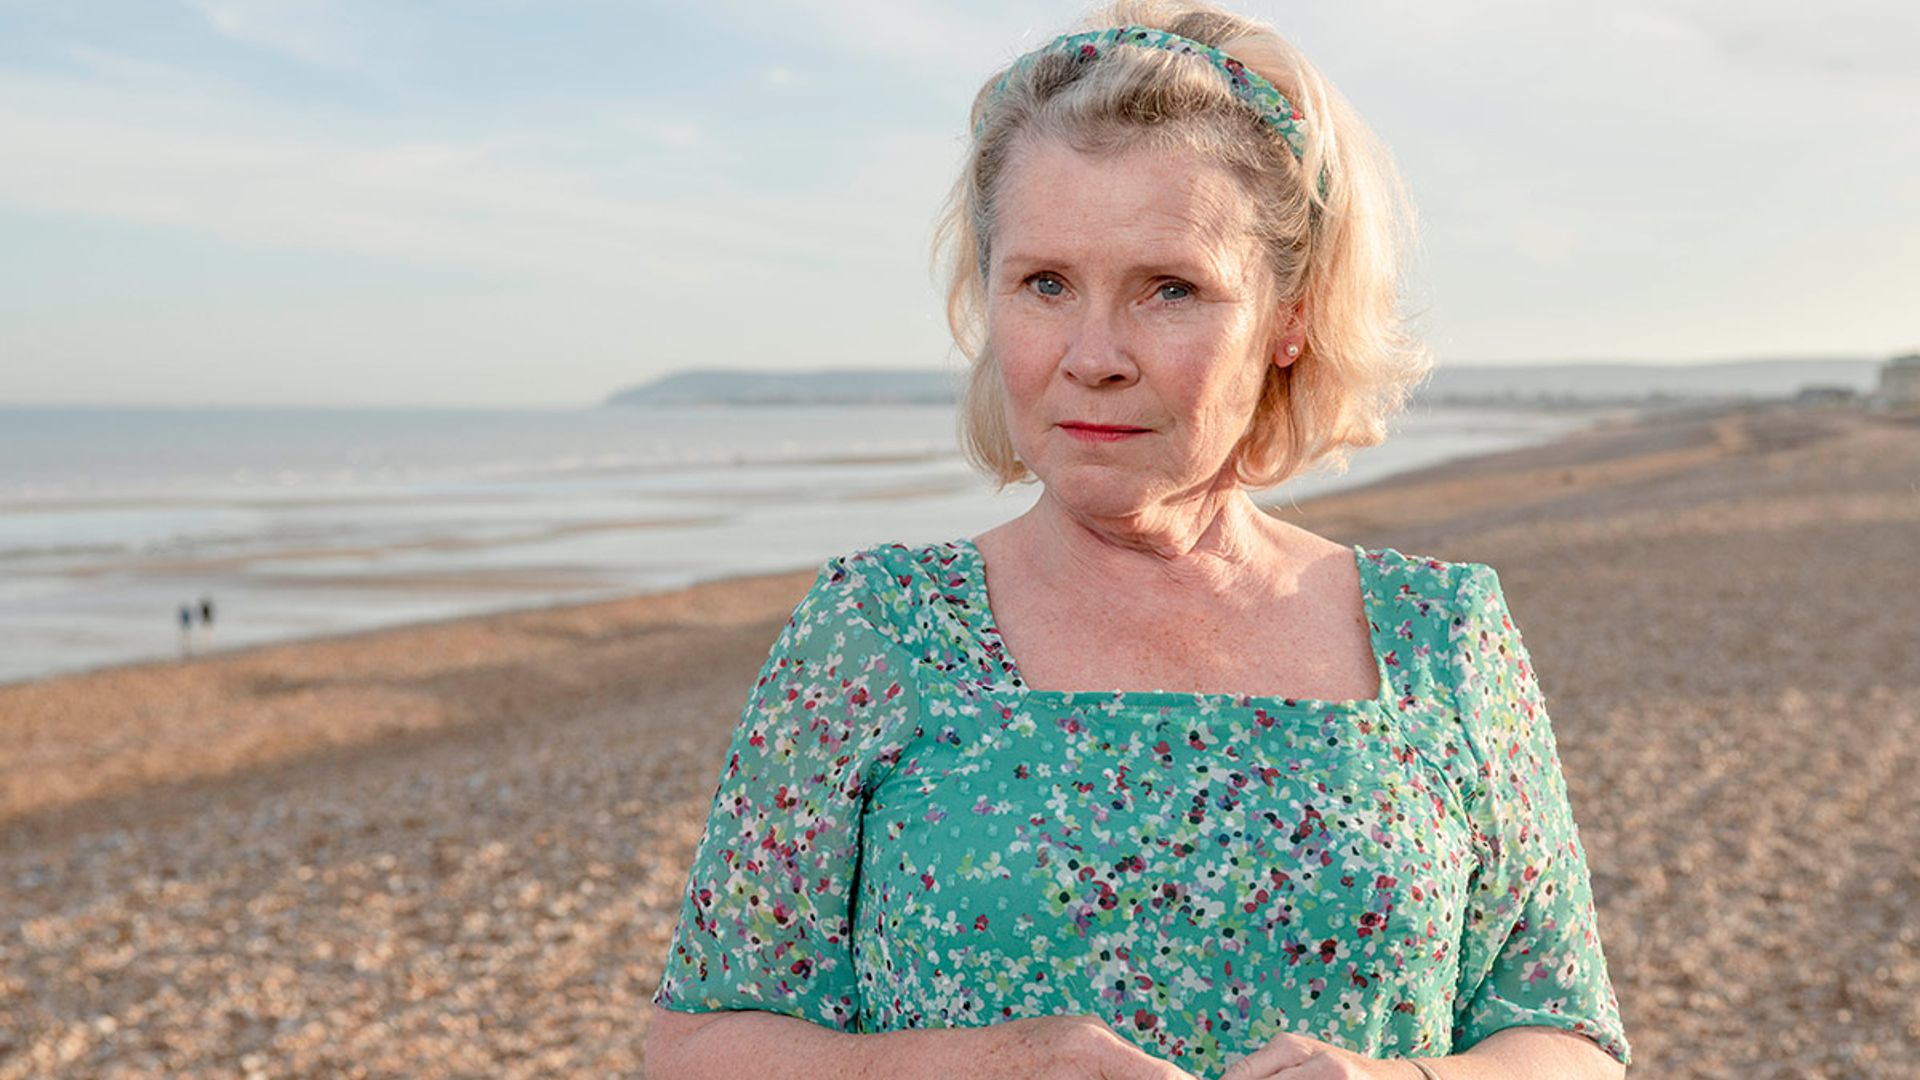 Imelda Staunton's character in Flesh and Blood was brought in after the script was written